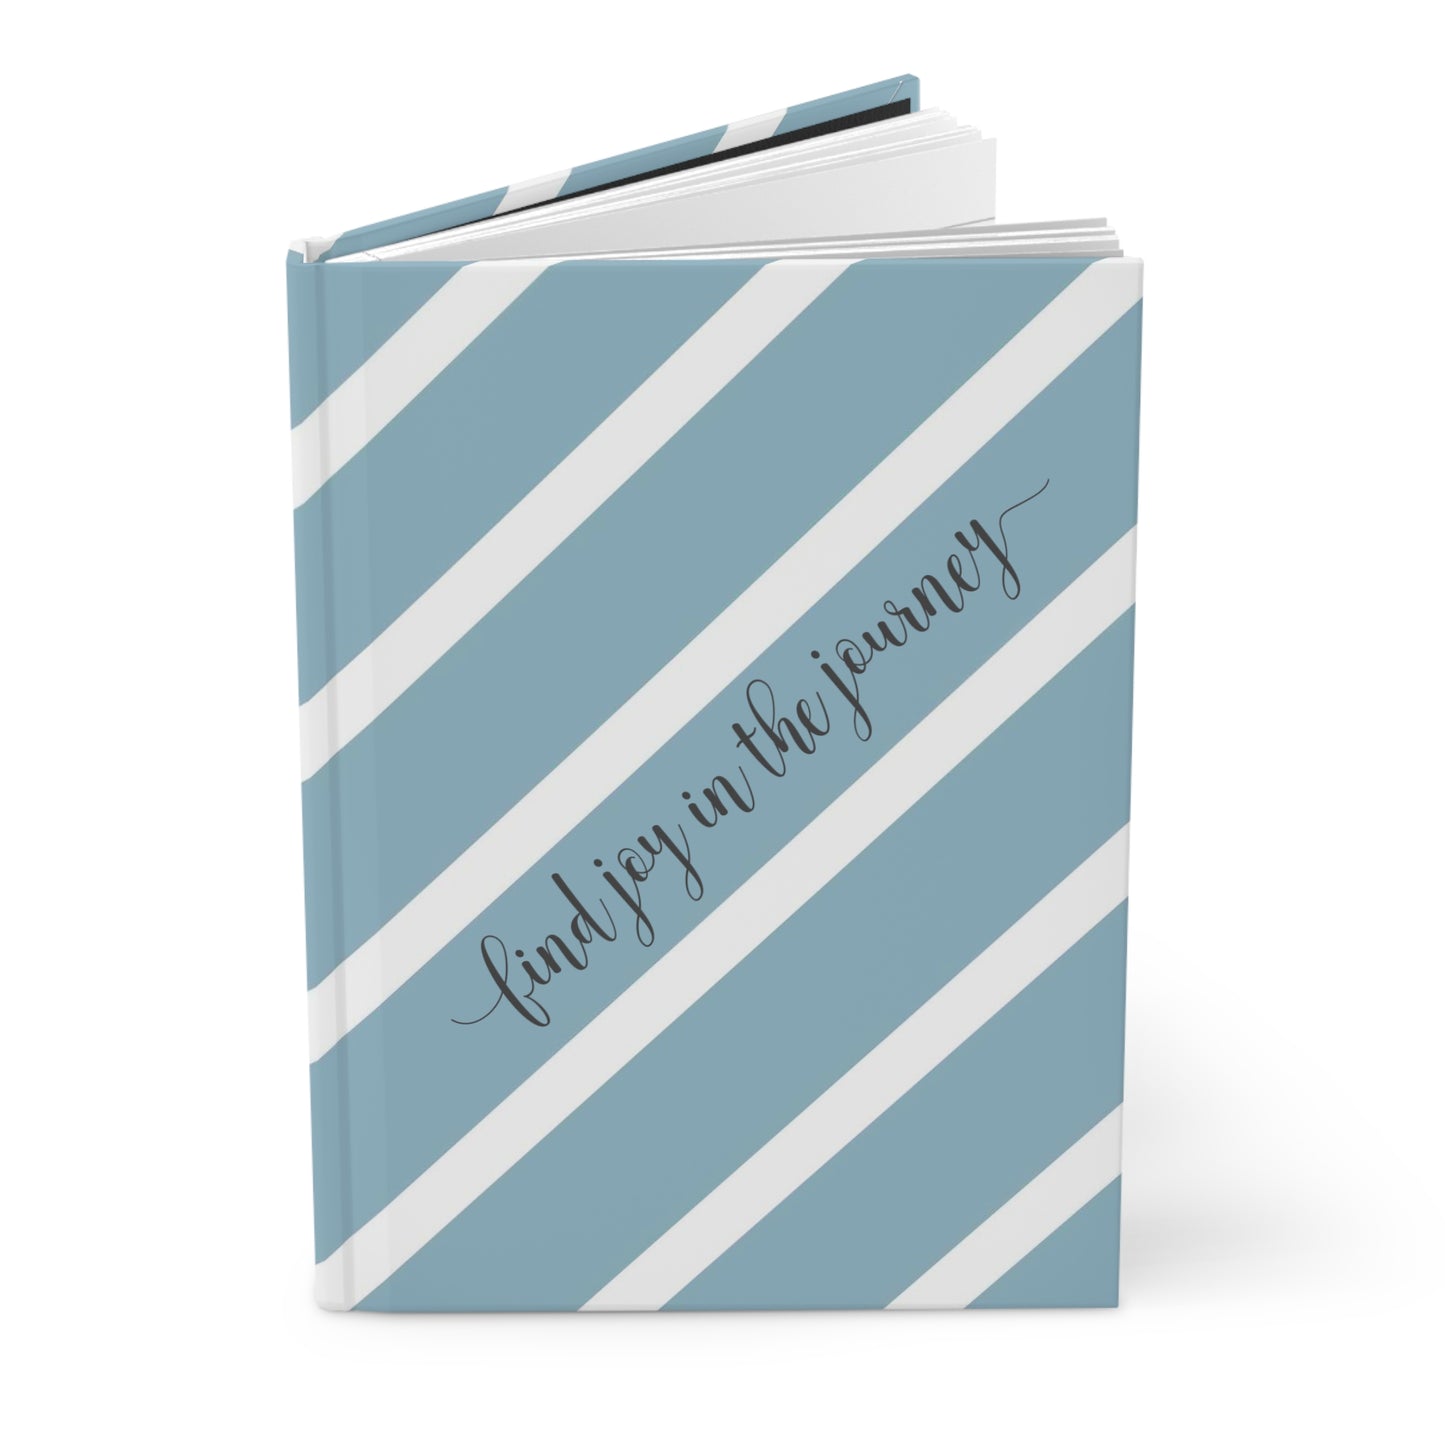 Find joy in the journey - Self Love - Inspirational Quote  - Blue White Diagonal 4 - Hardcover Journal Matte